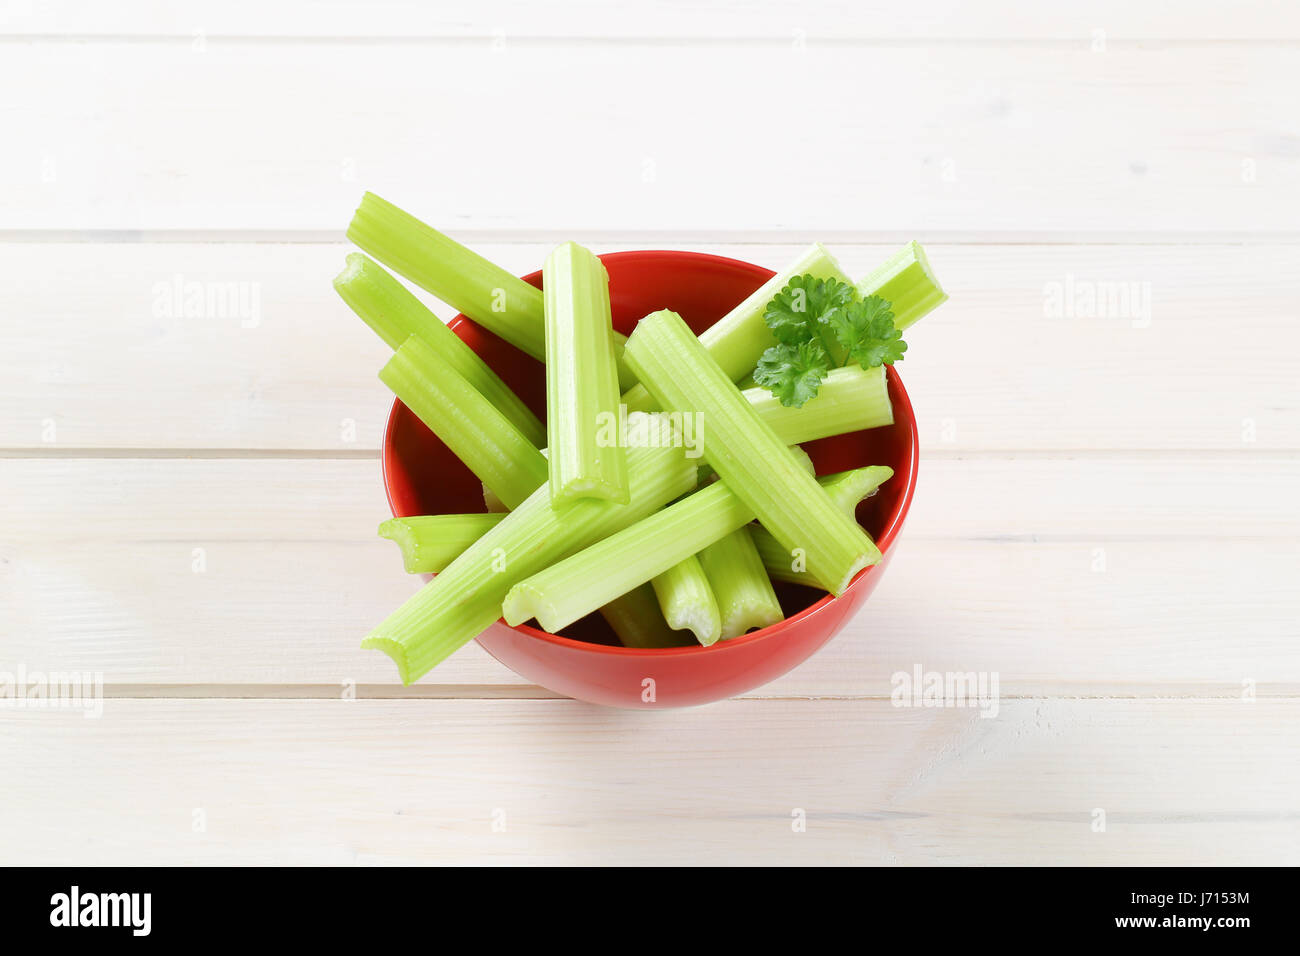 bowl of green celery stems on white wooden background Stock Photo